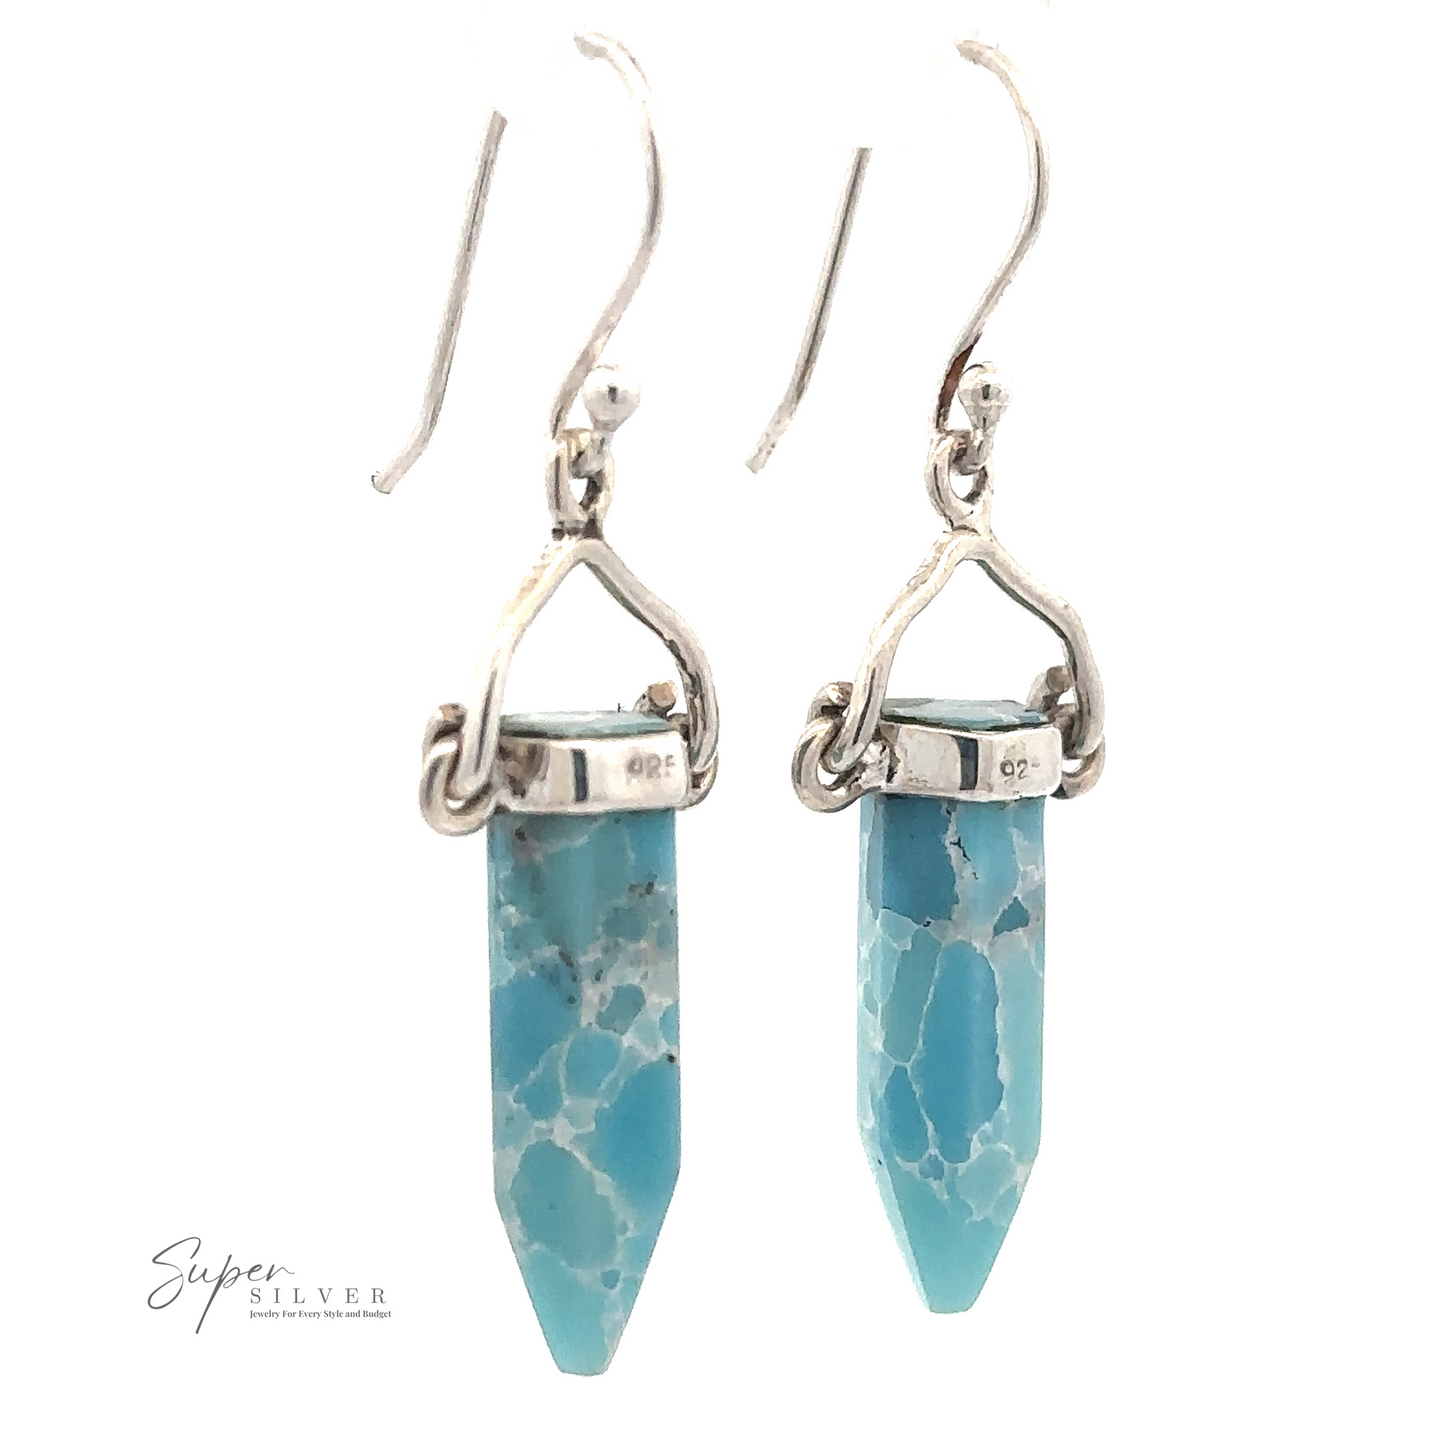 
                  
                    A pair of Obelisk Shape Raw Larimar Earrings with sterling silver French hooks and mountings. The gemstones are shaped into elongated hexagonal prisms.
                  
                